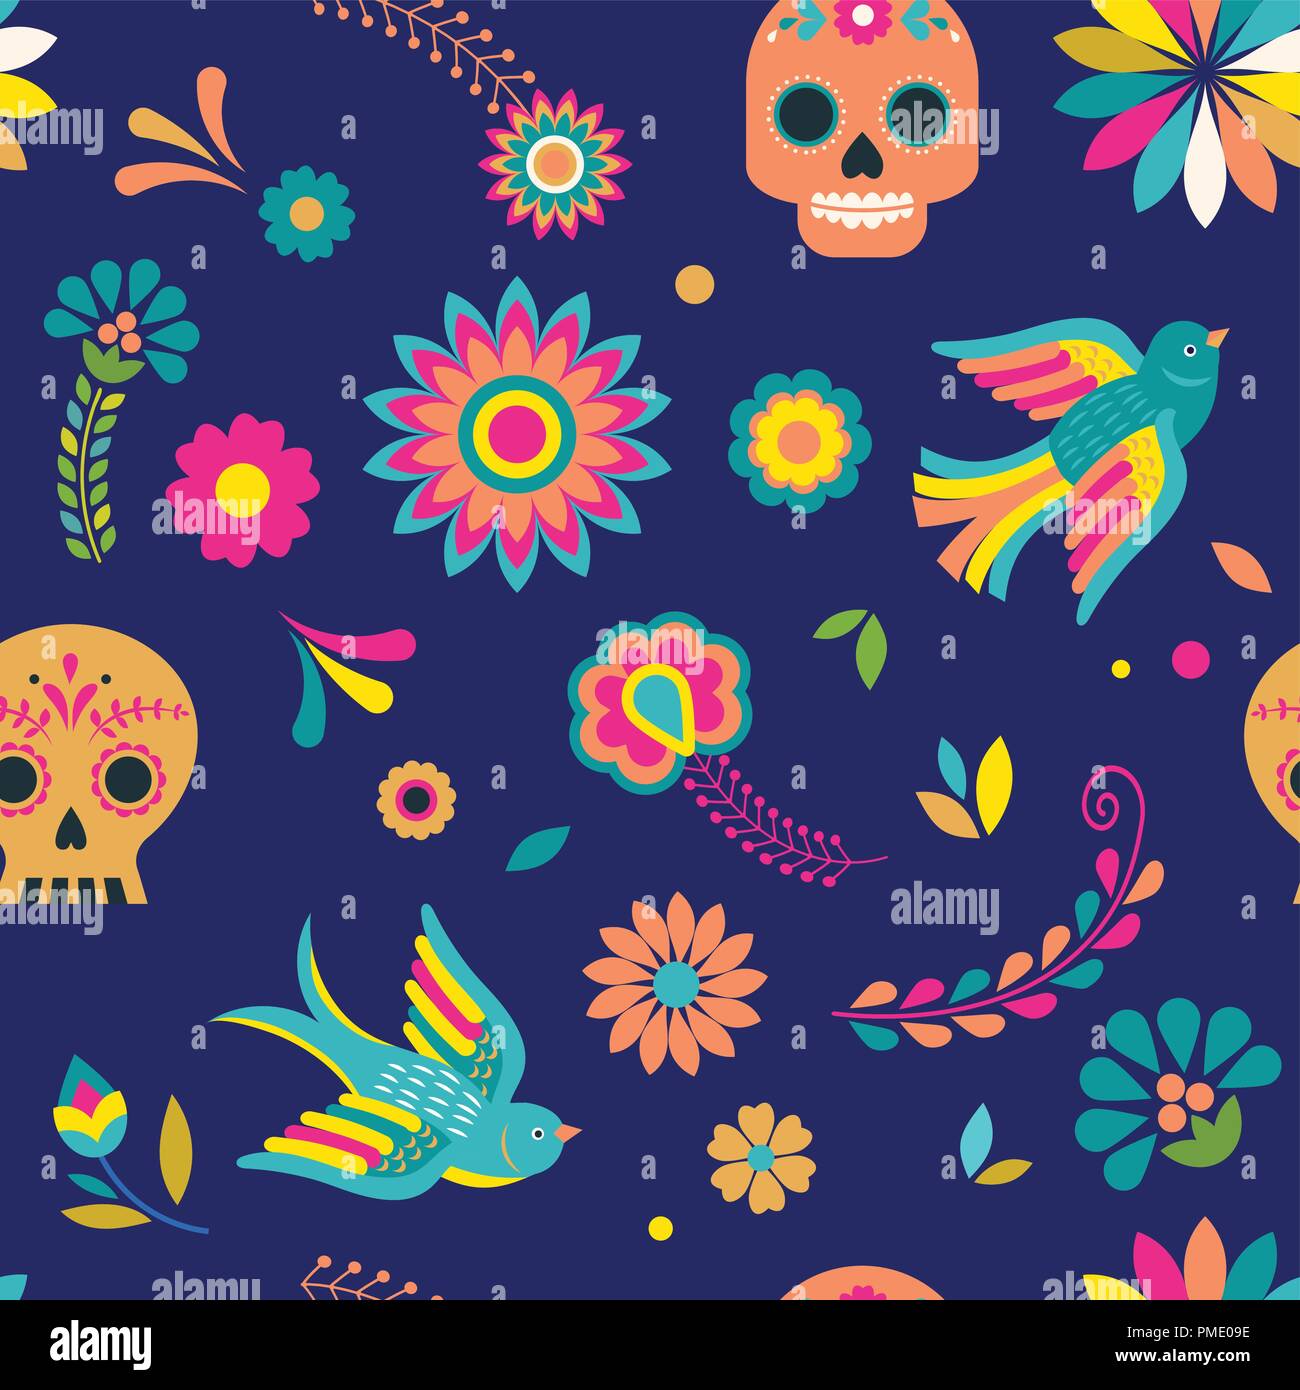 day-of-the-dead-dia-de-los-muertos-background-and-seamless-pattern